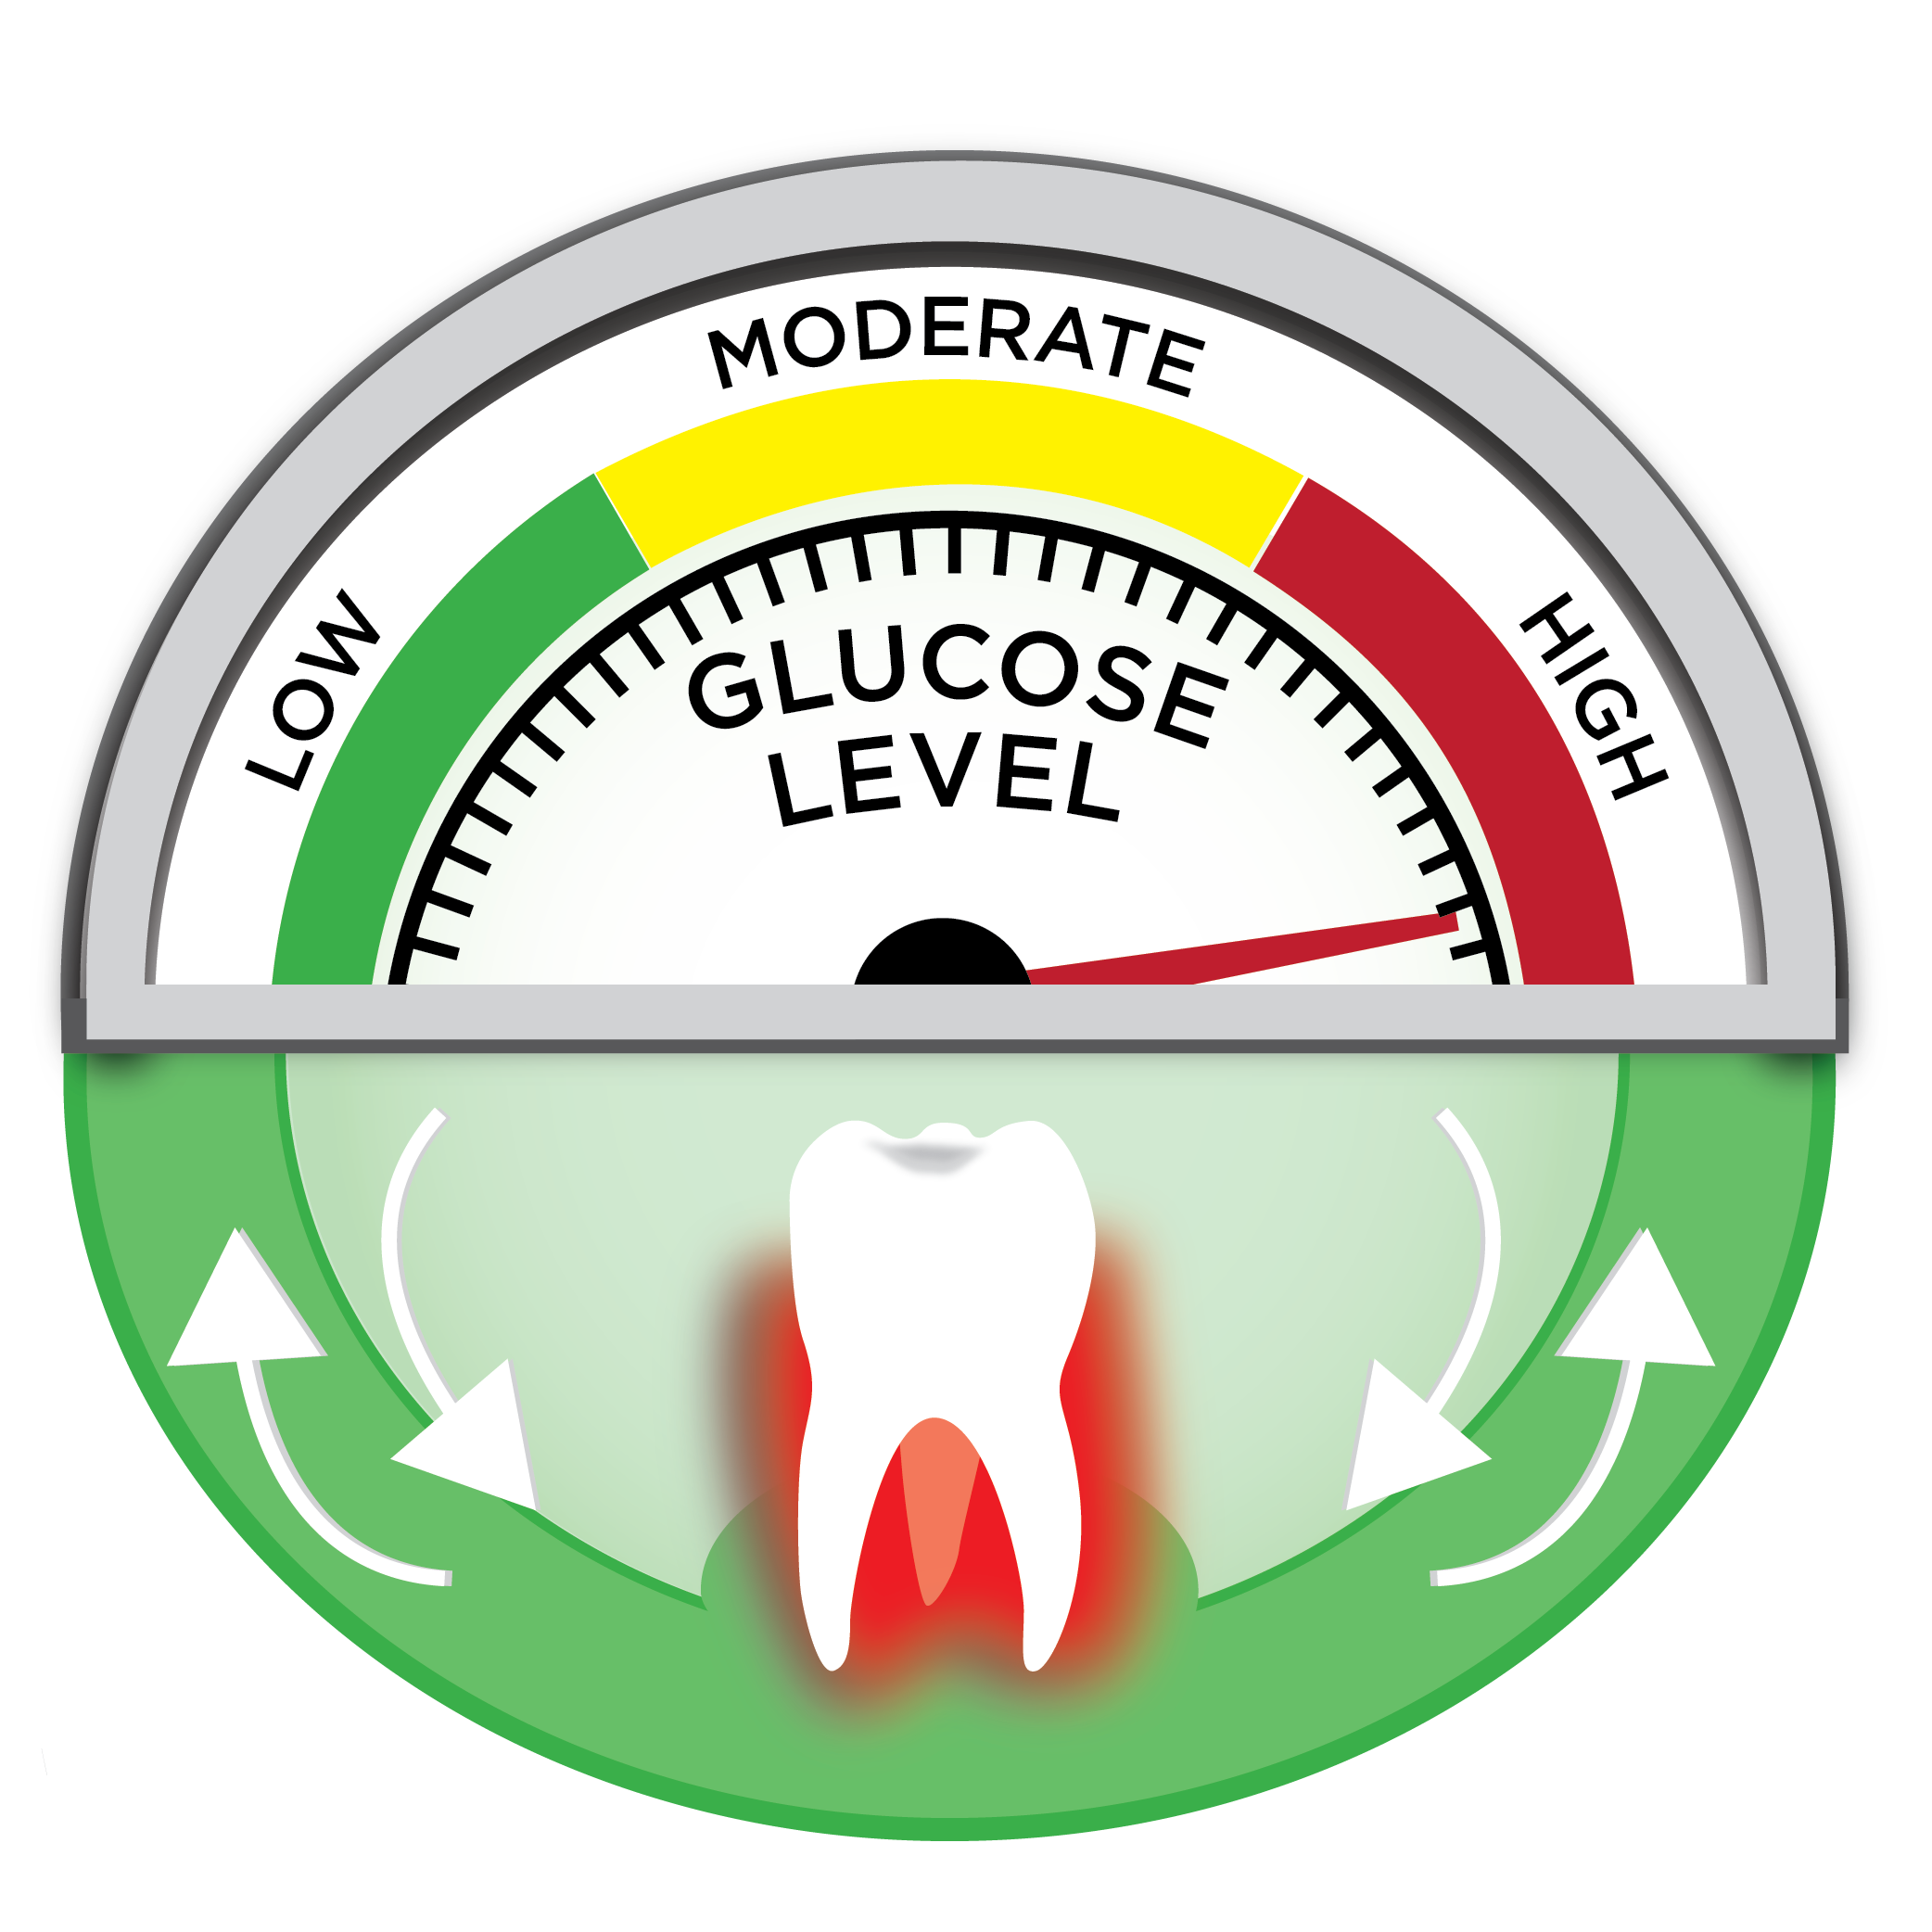 Illustration showing the circular connection between glucose level (low, moderate, high) and the health of teeth and gums